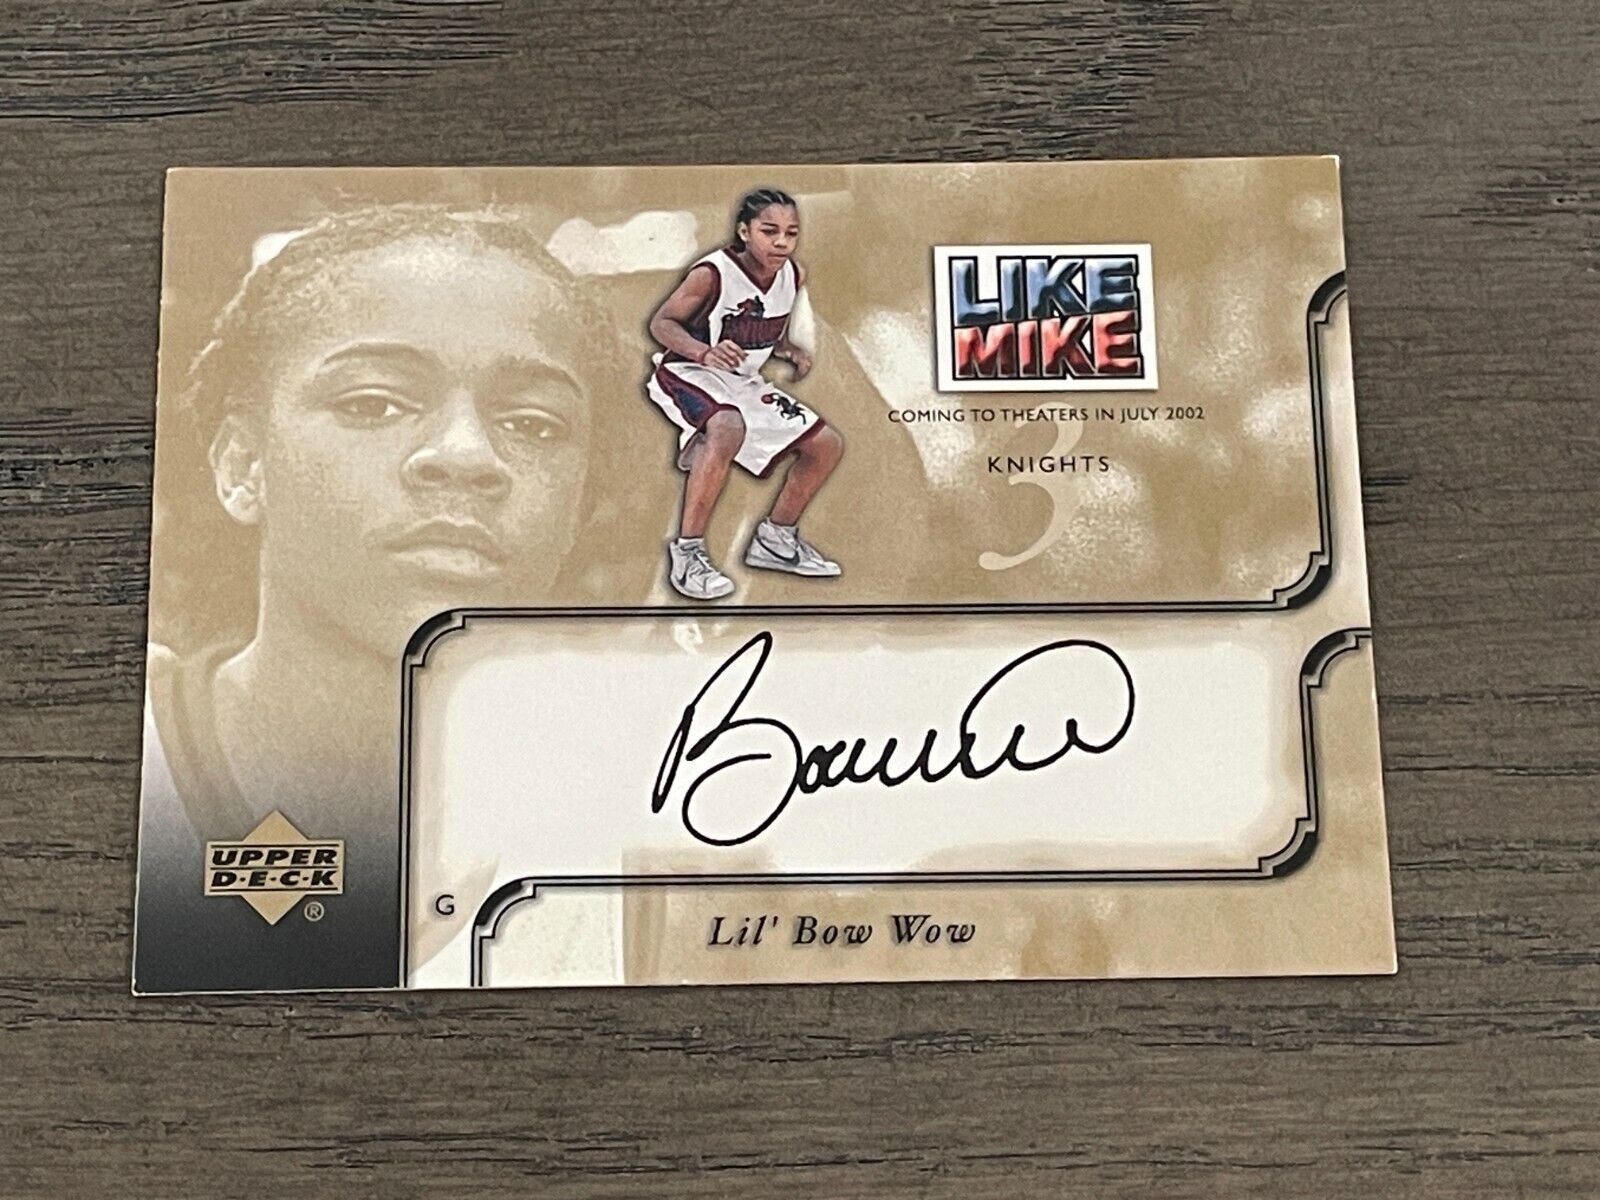 2001-02 Upper Deck Inspirations Like Mike Lil’ Bow Wow Facsimile Autograph #BW